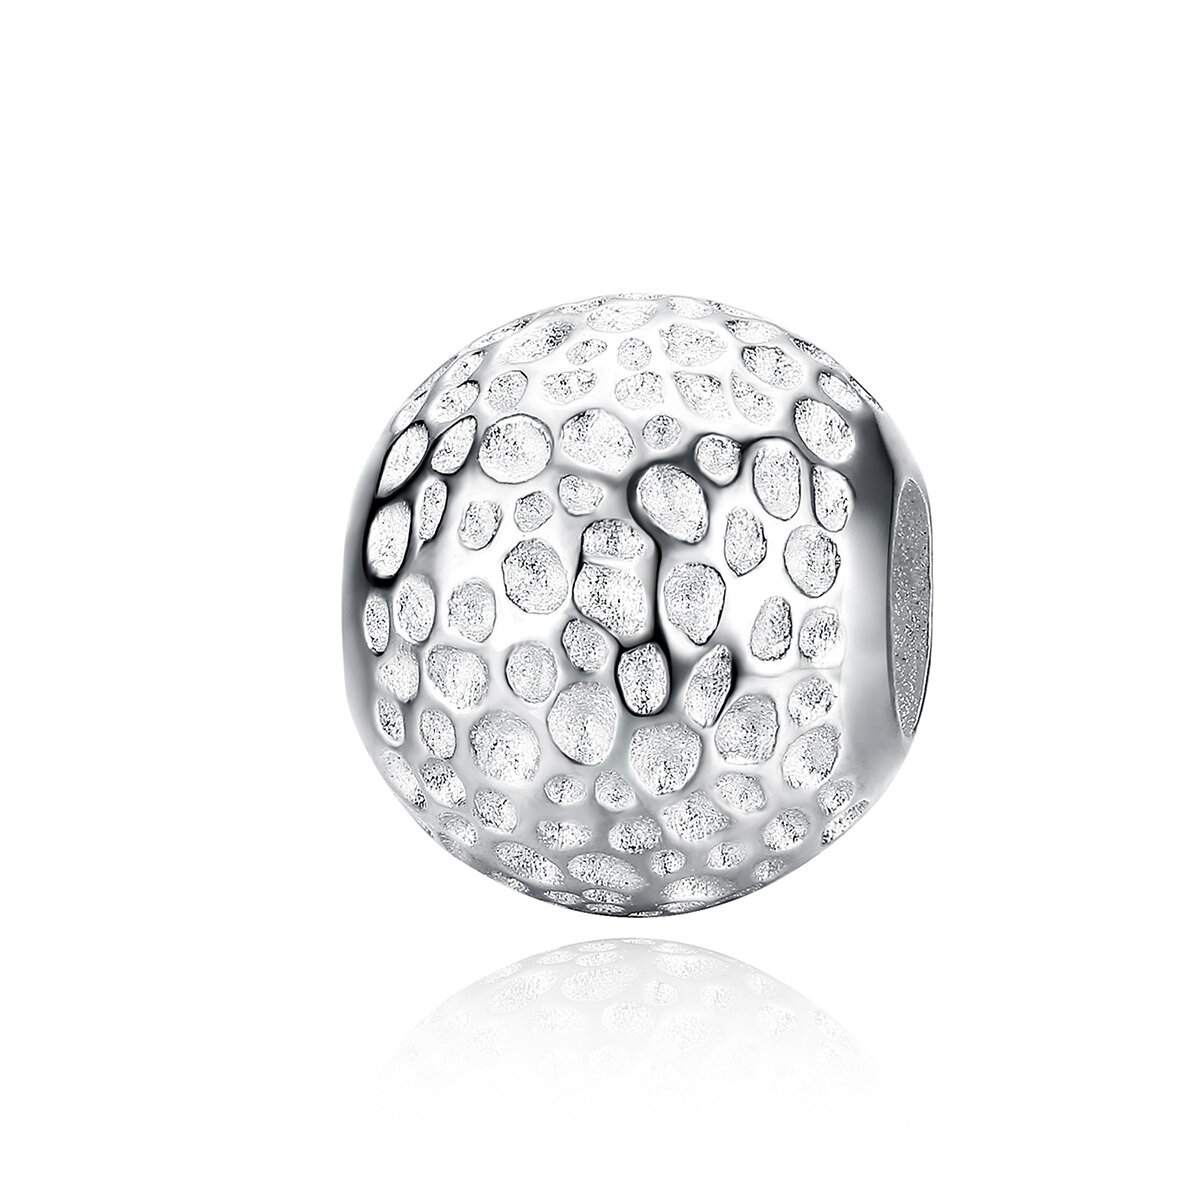 GemKing SCC1245 the Bead with Texture S925 Sterling Silver Charm